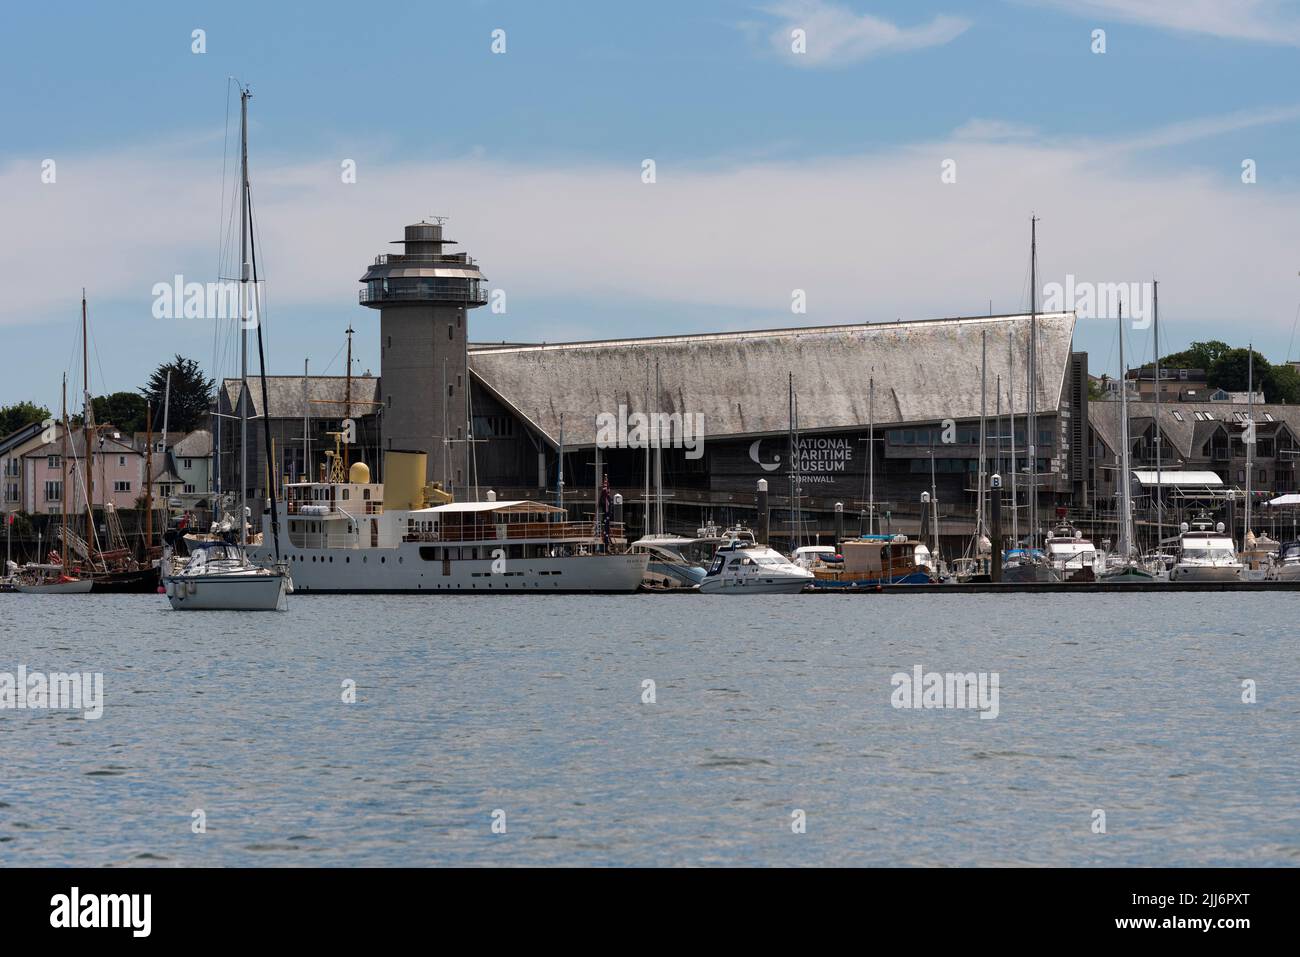 Falmouth, Cornwall, England, UK. 2022. The National Maritime Museum, on the harbourside in Falmouth, Cornwall showing exterior exhibits. Stock Photo